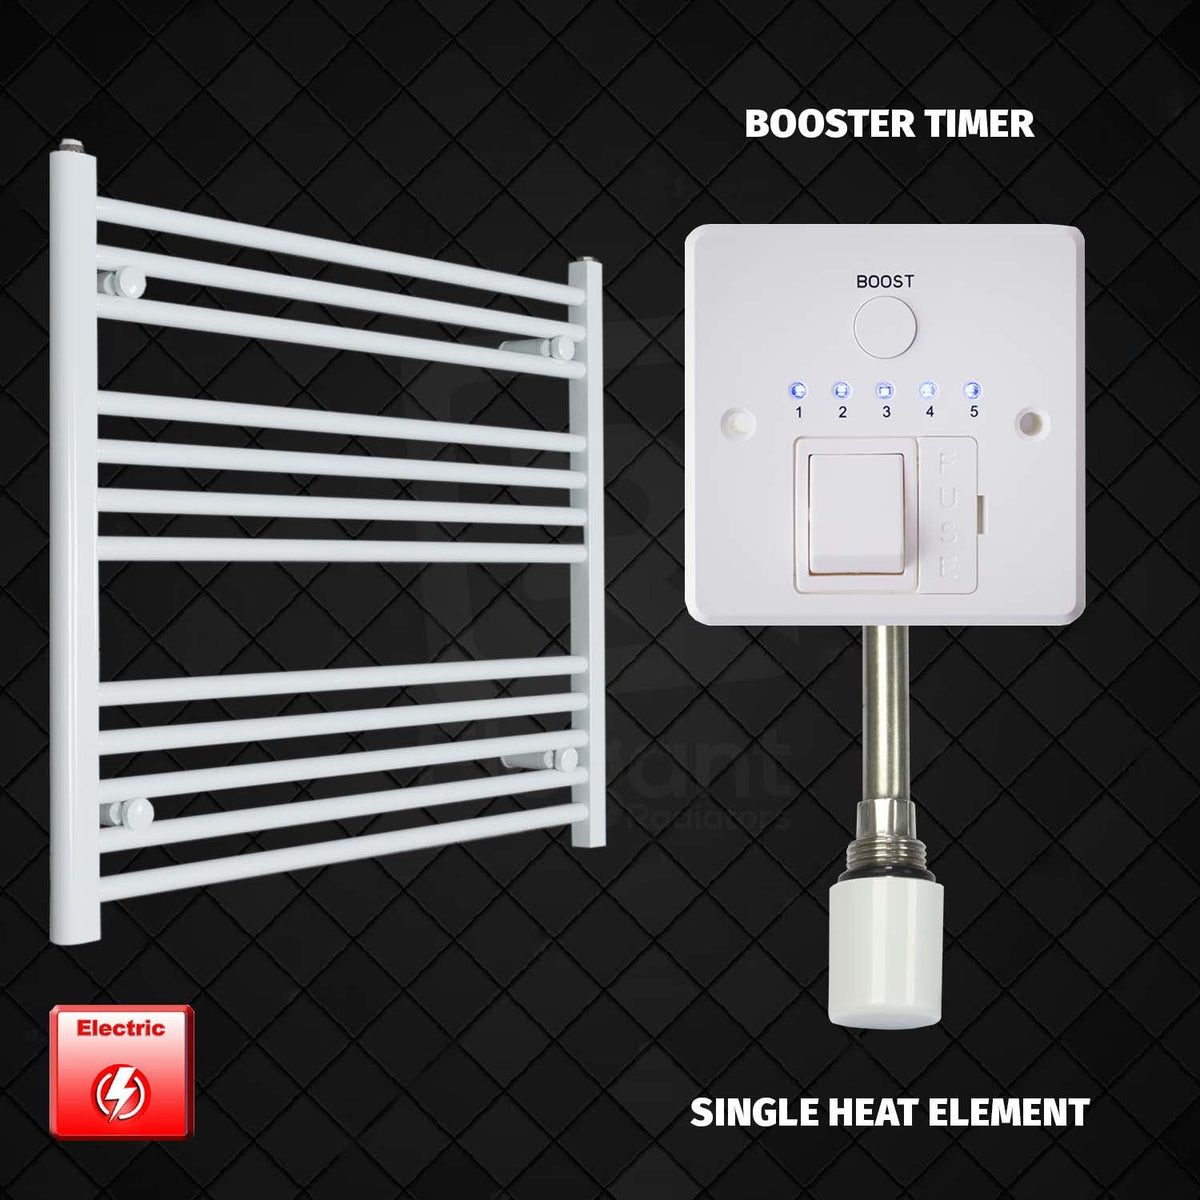 700 mm High x 900 mm Wide Pre-Filled Electric Towel Rail White HTR Single heat element Booster timer